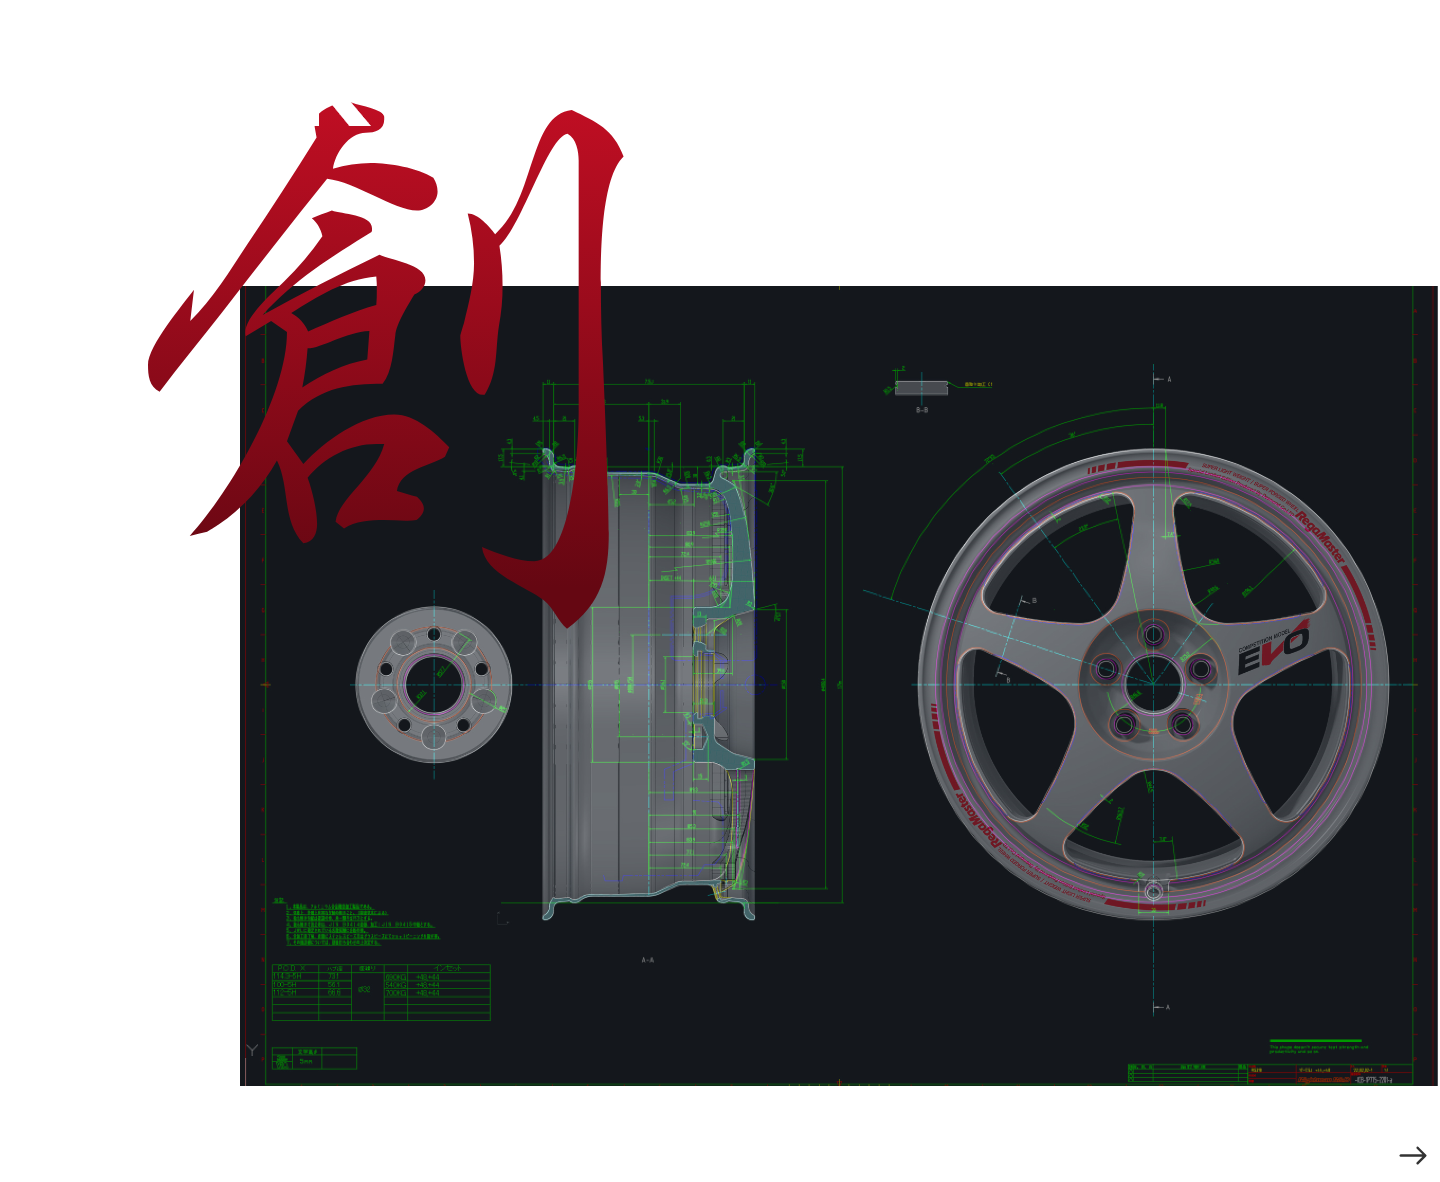 WORKS 創